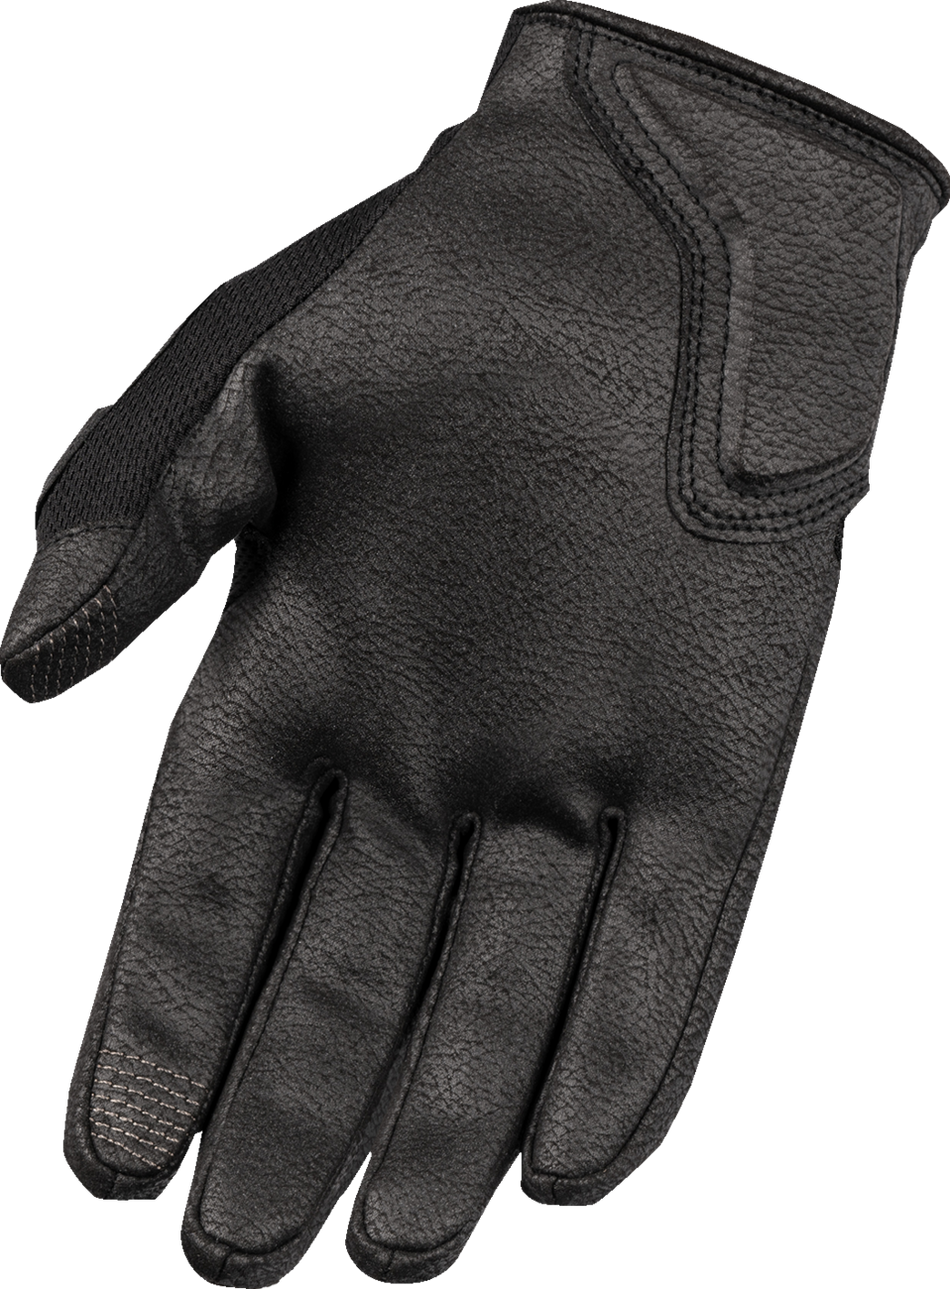 ICON Punchup CE™ Gloves - Black - XL 3301-4591